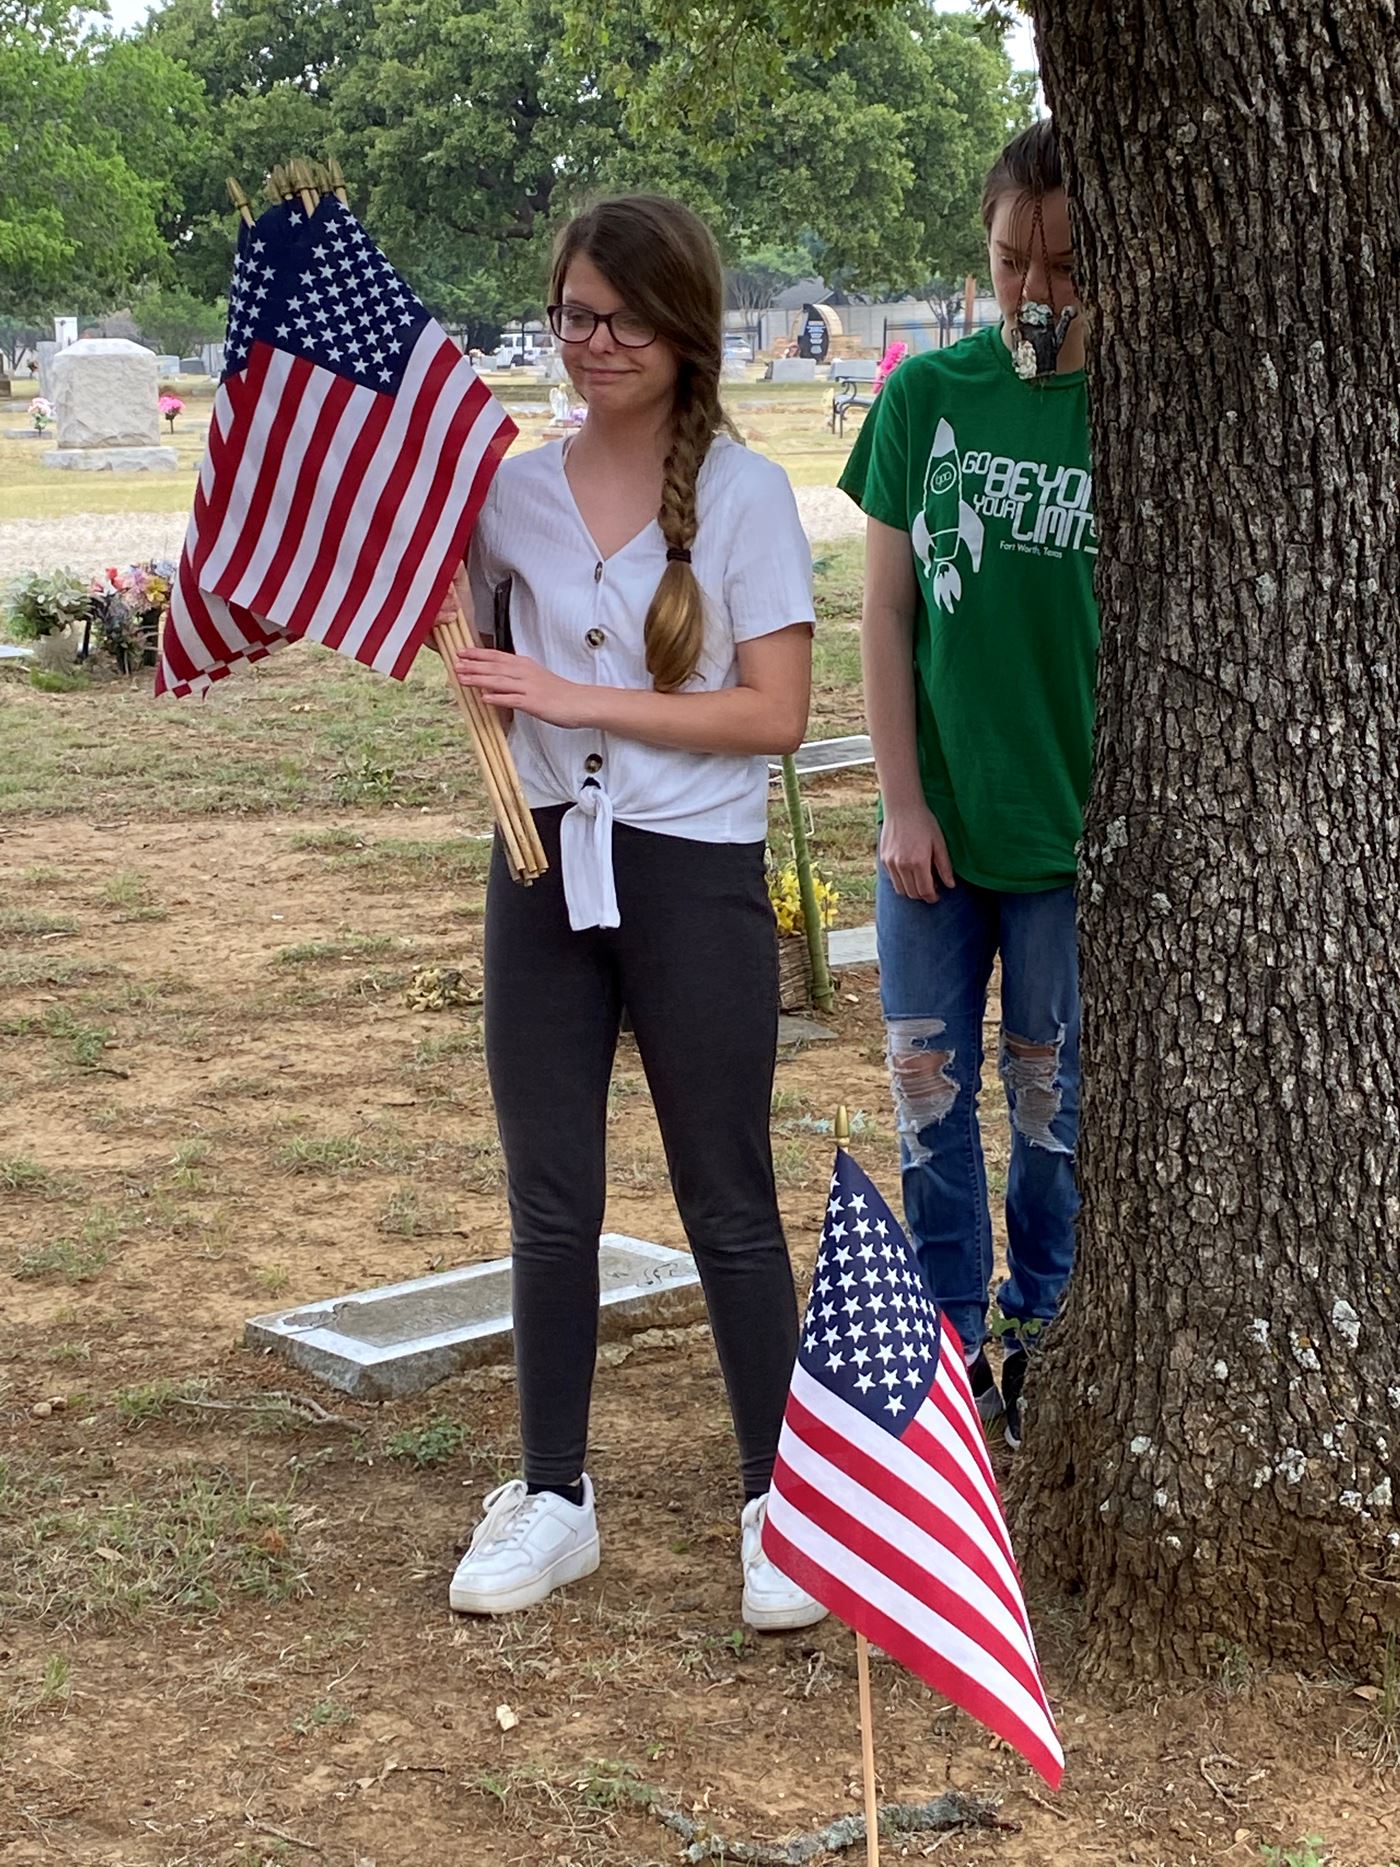 The Flower Mound Chapter NSDAR member's daughters helping their mom honor local veterans.